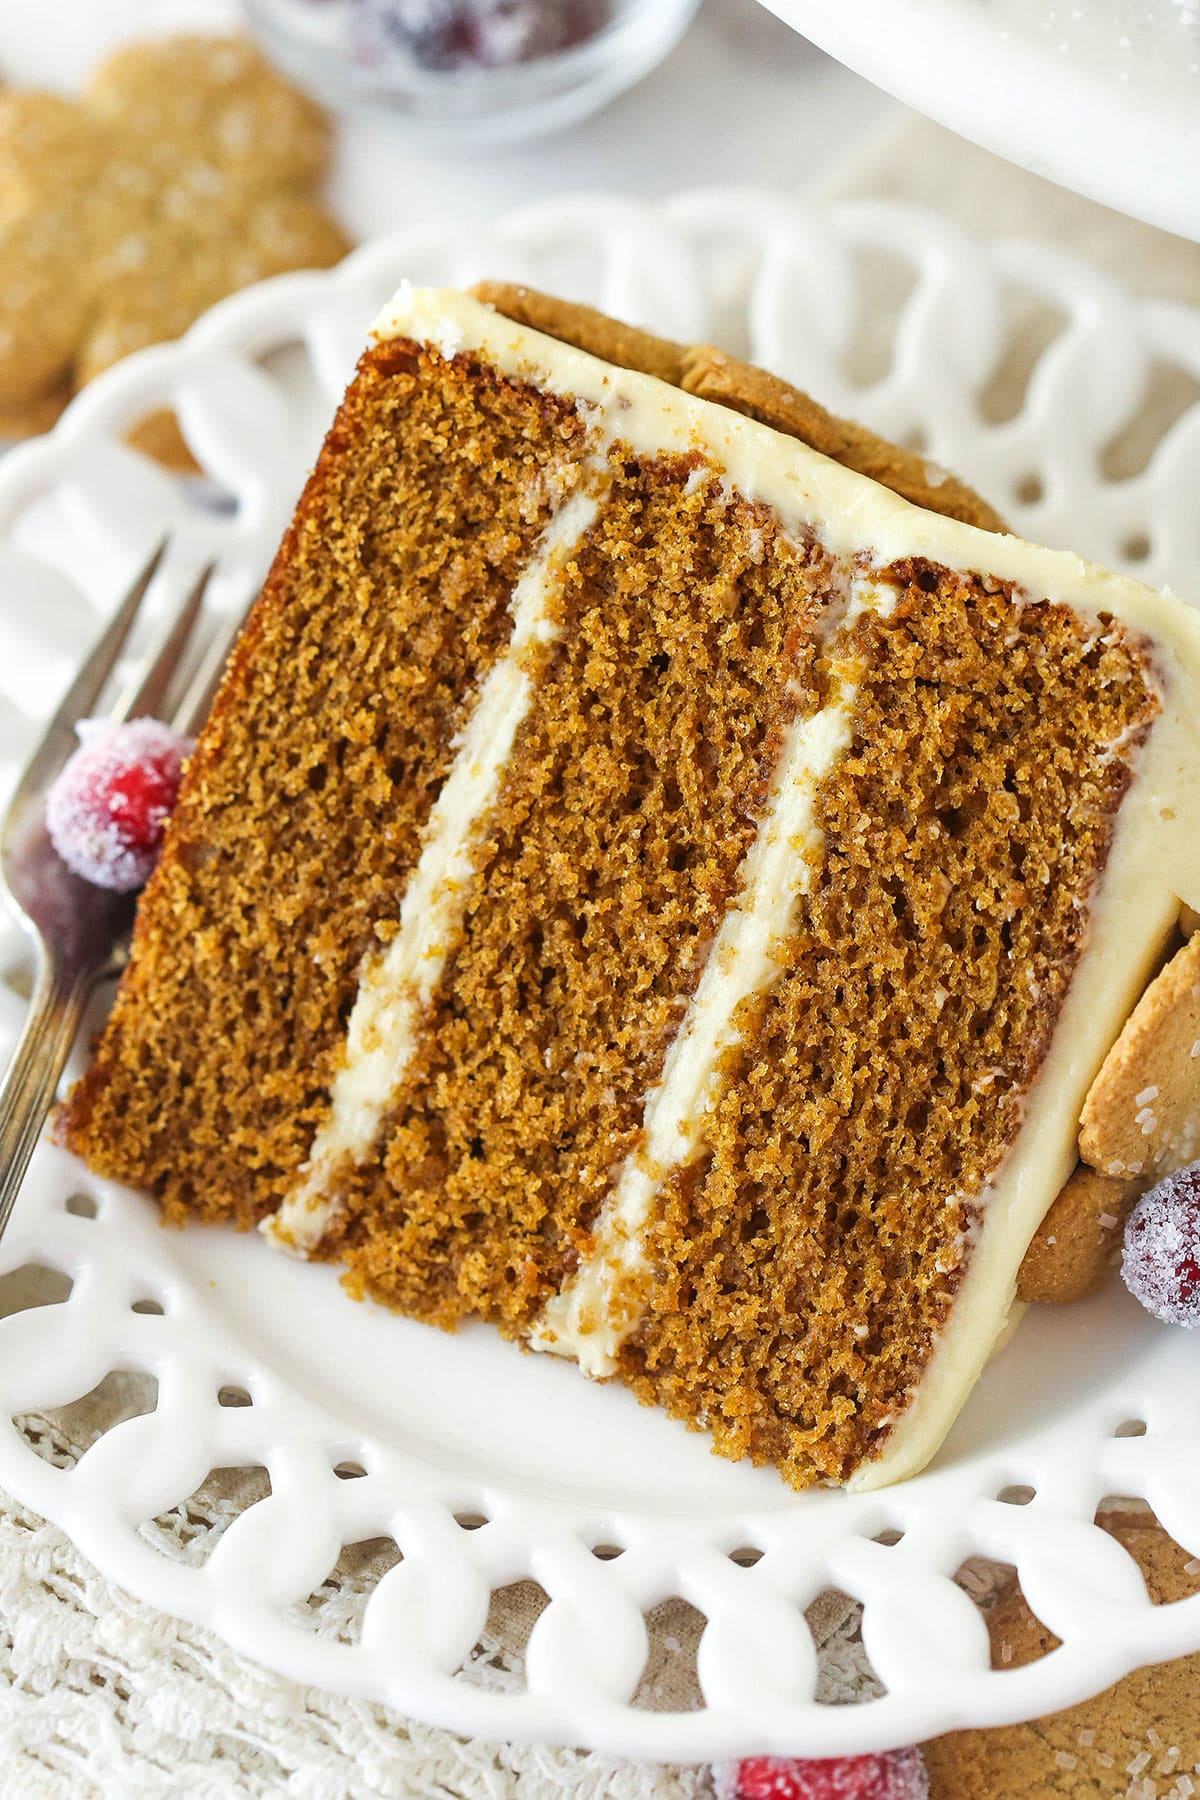 A slice of gingerbread layer cake on a plate with a fork.